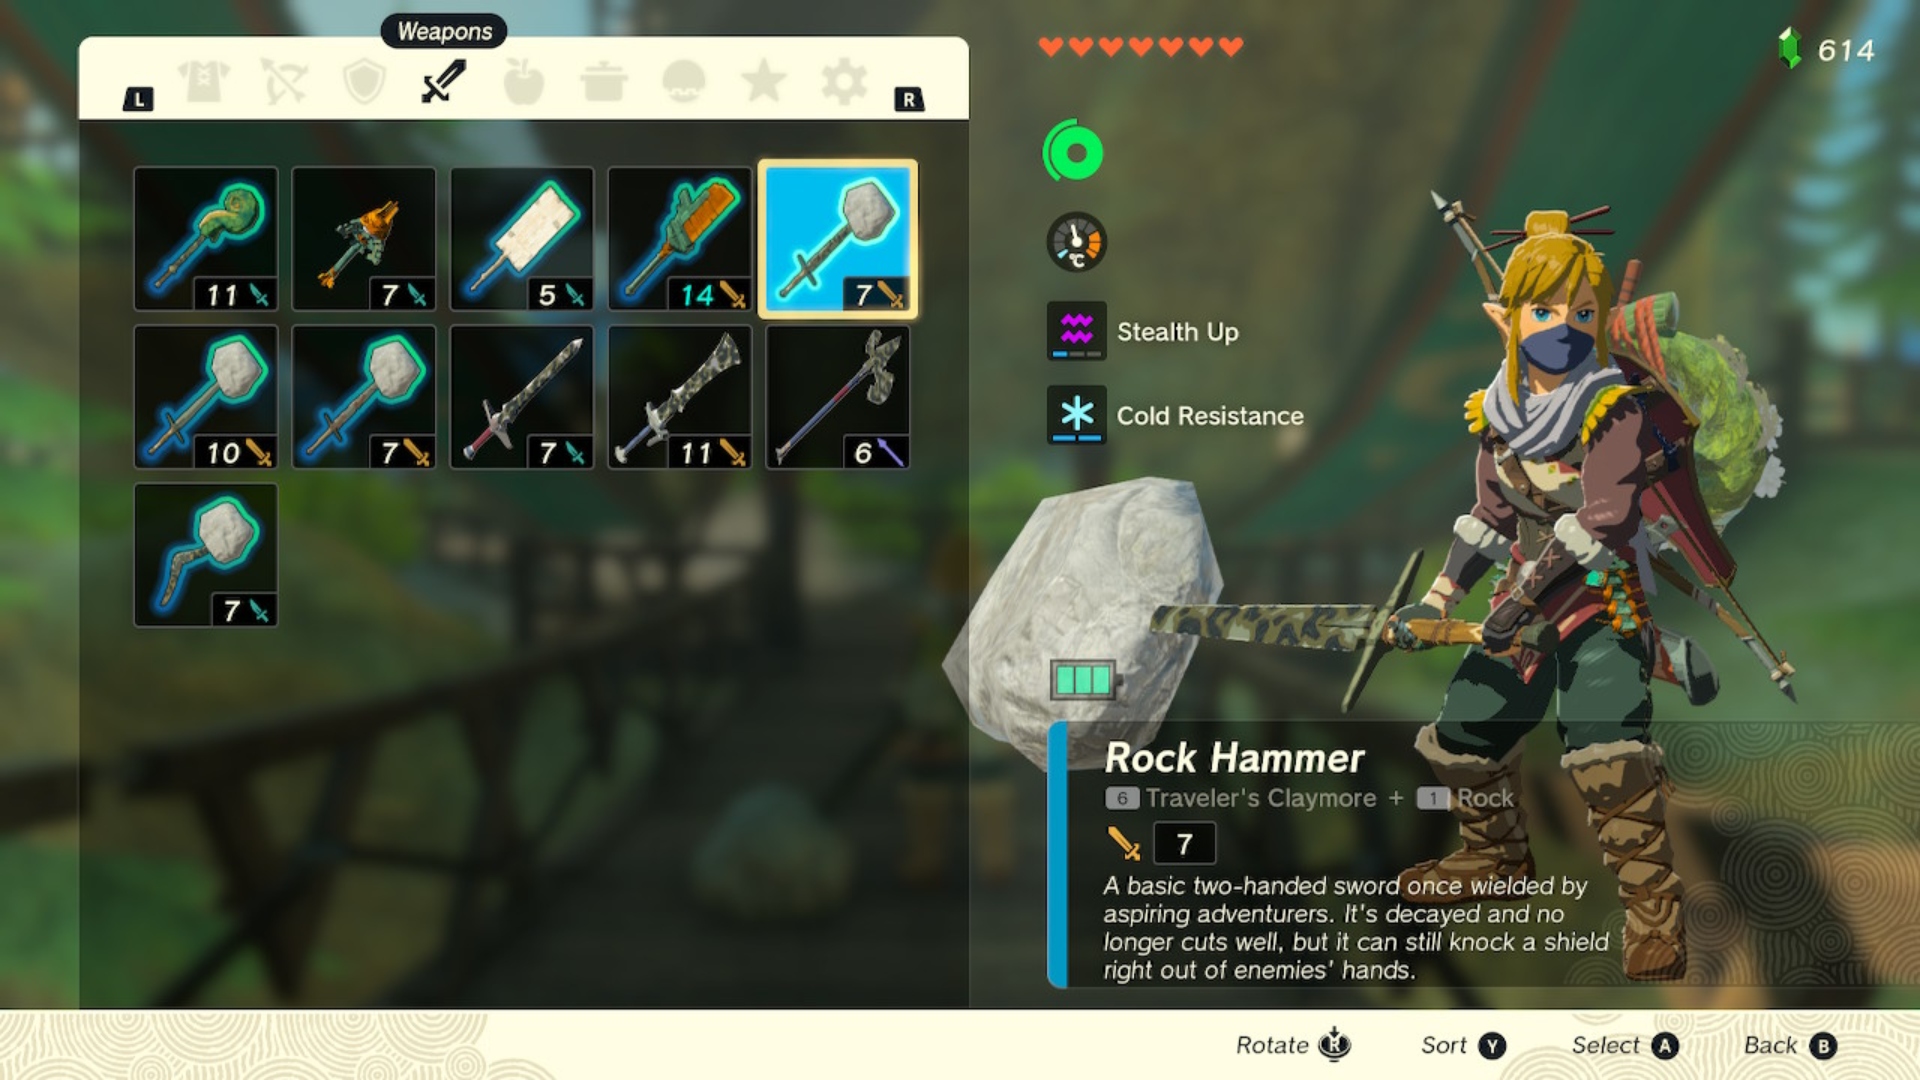 The weapon inventory screen in The Legend of Zelda: Tears of the Kingdom.